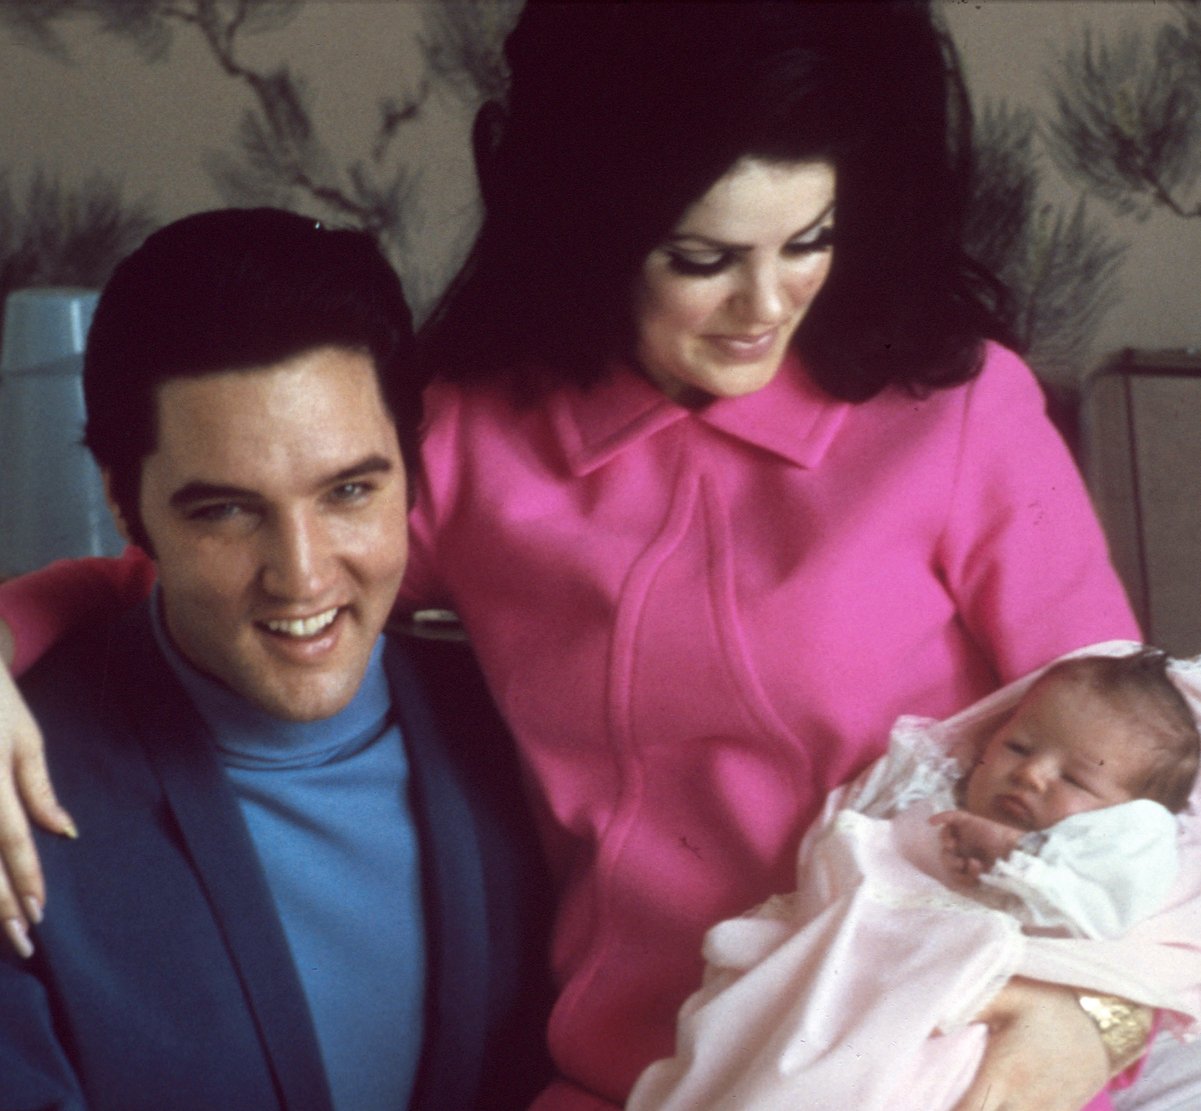 Elvis and Priscilla Presley with their daughter, Lisa Marie Presley